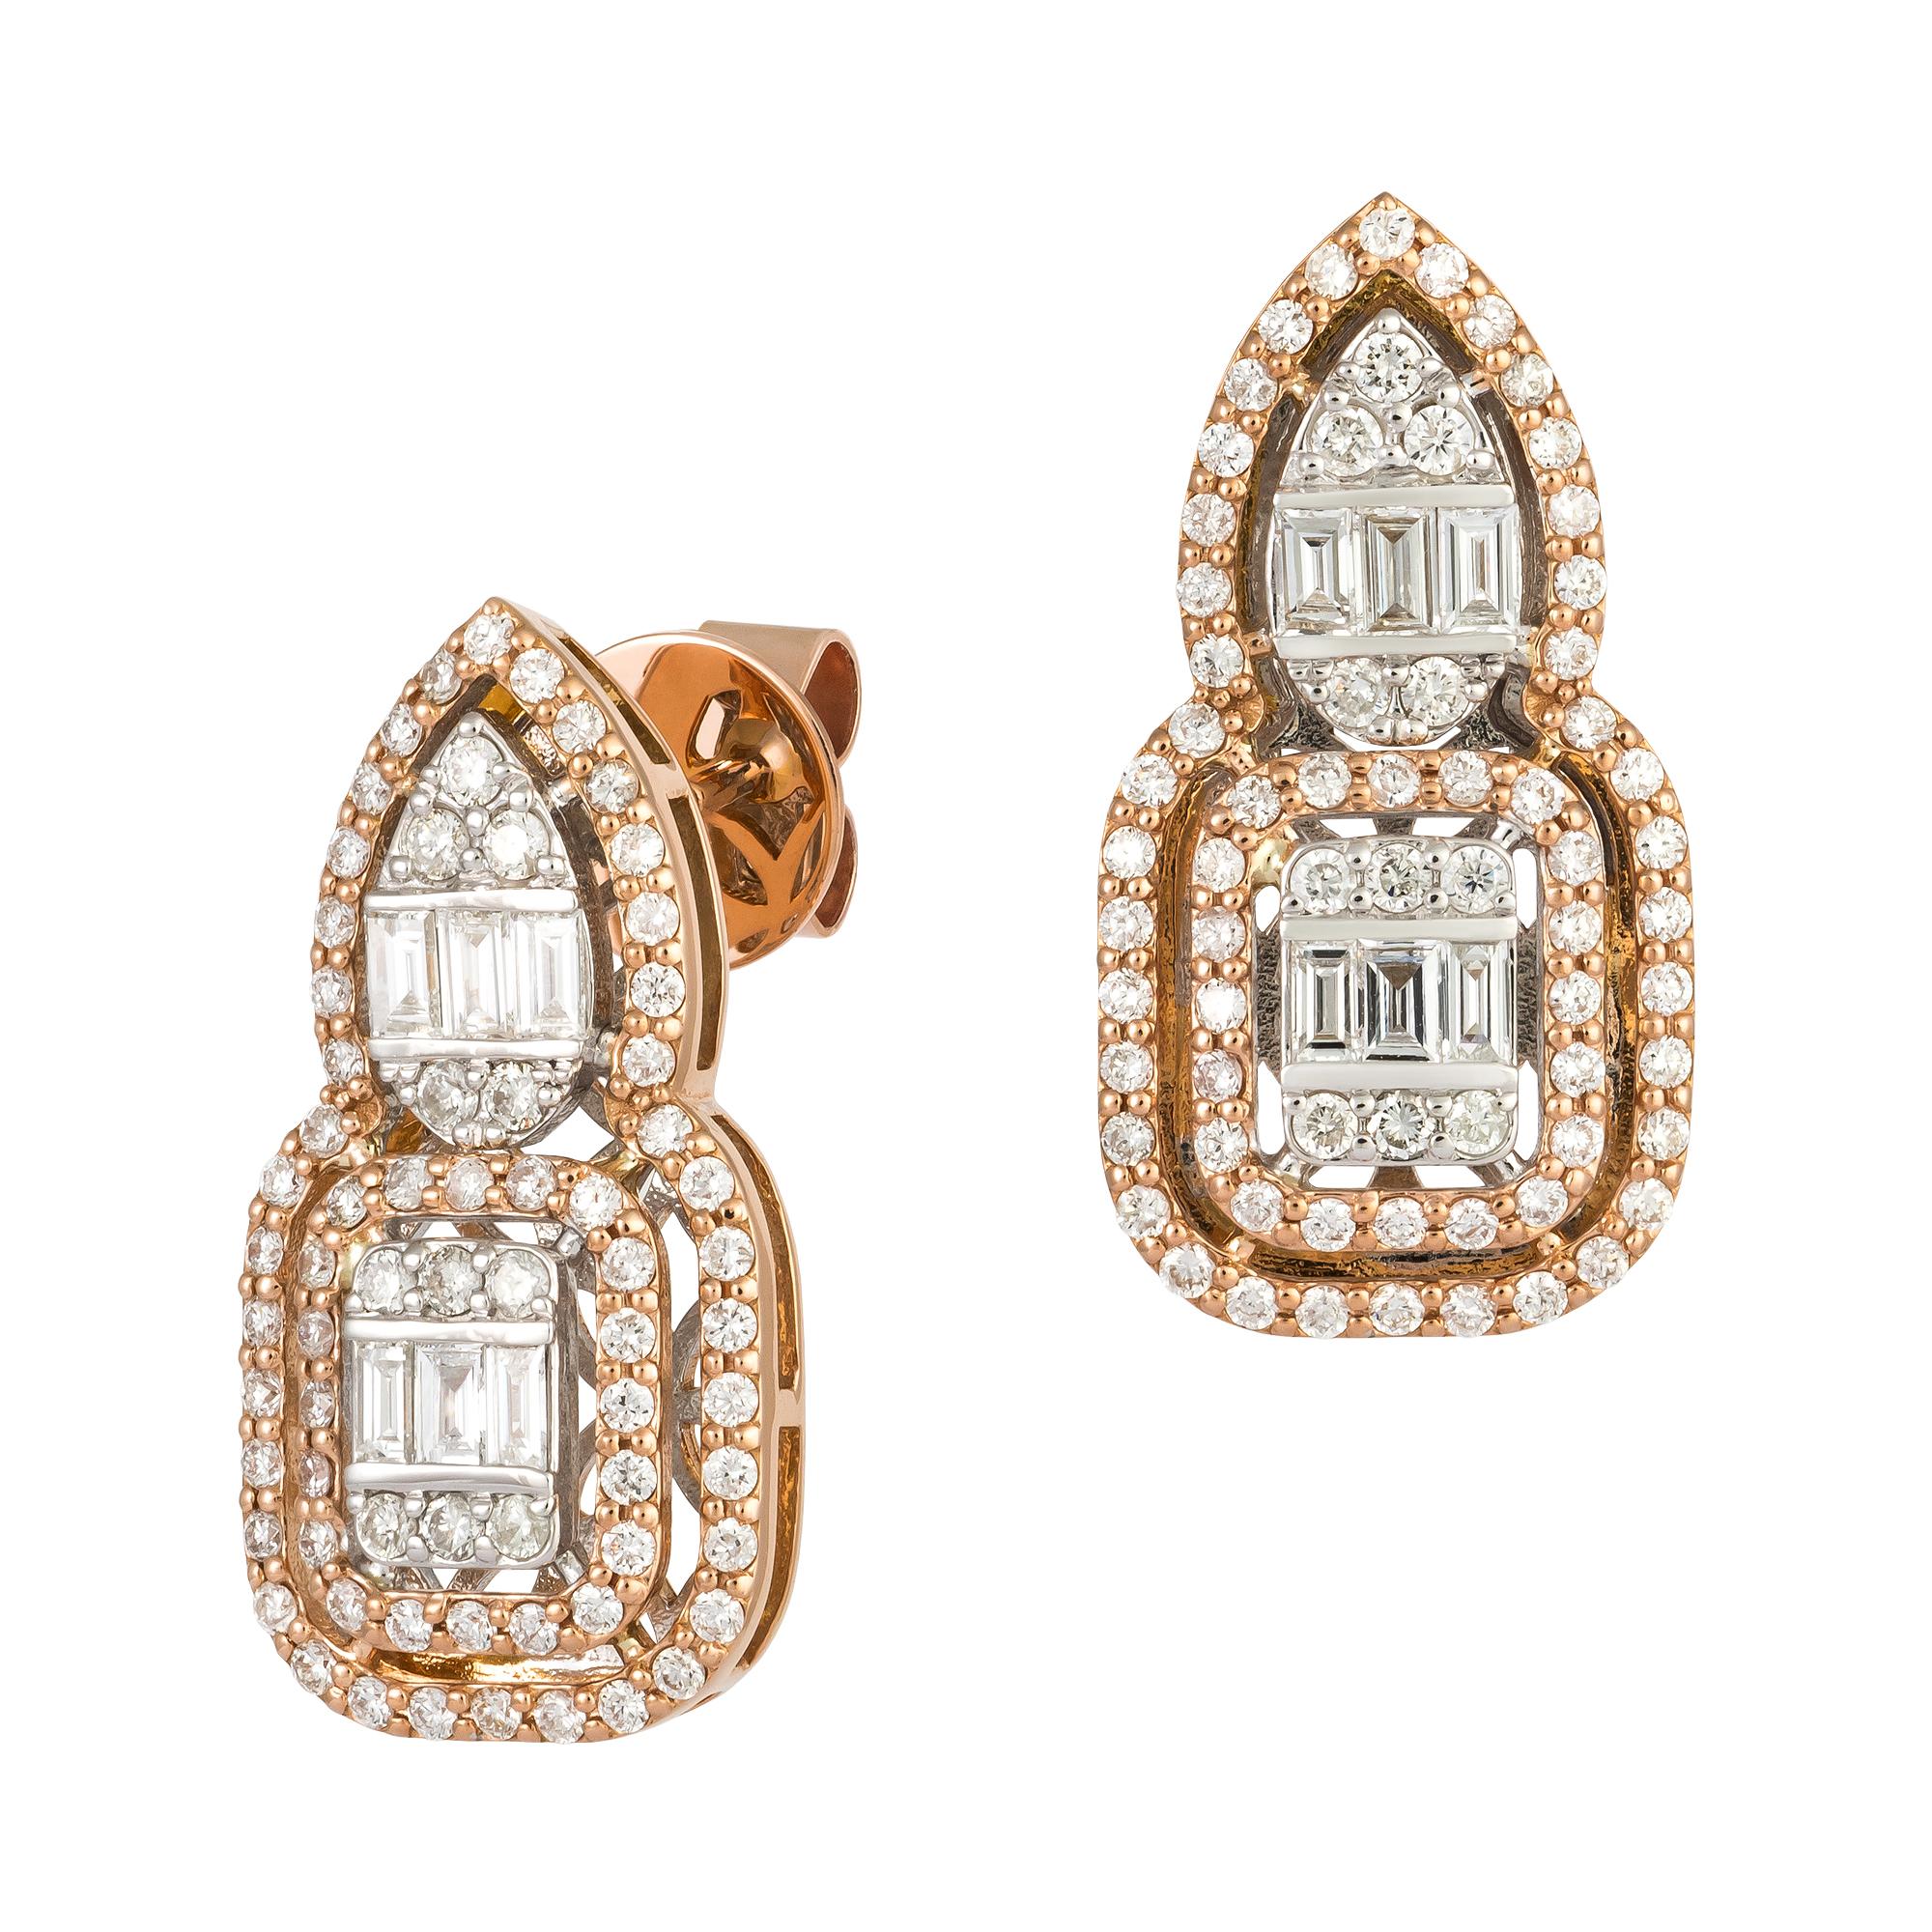 EARRING 18K Pink Gold Diamond 0.88 Cts/138 Pcs Tapered Baguette 0.38 Cts/12 Pcs